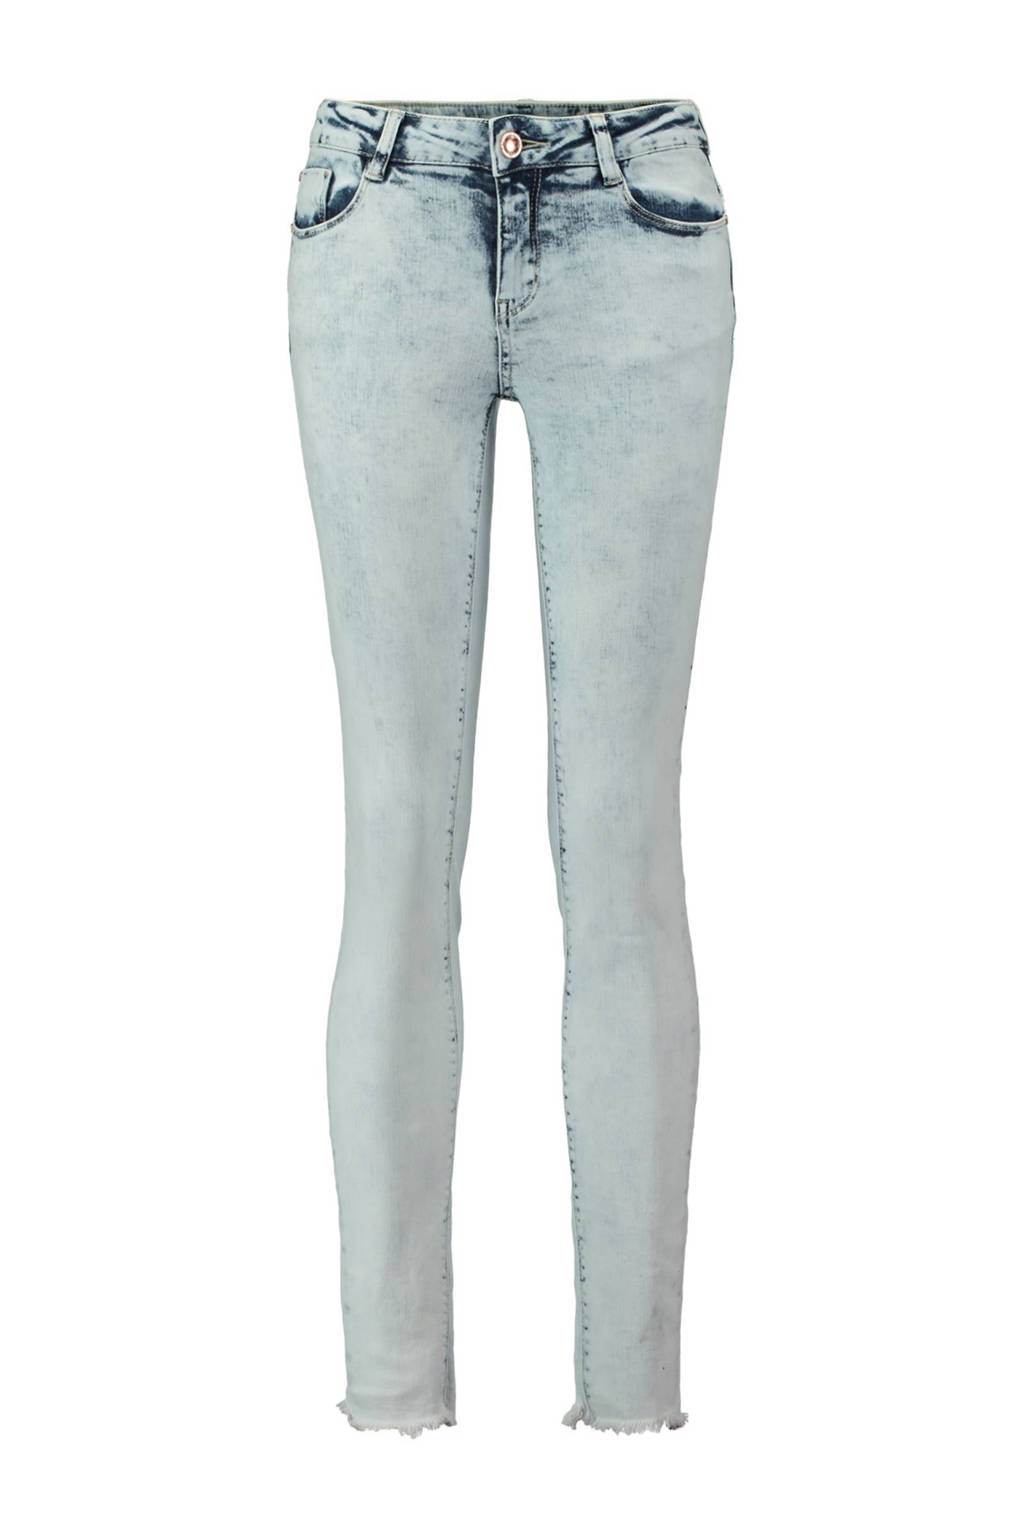 CoolCat skinny fit jeans lage taille |